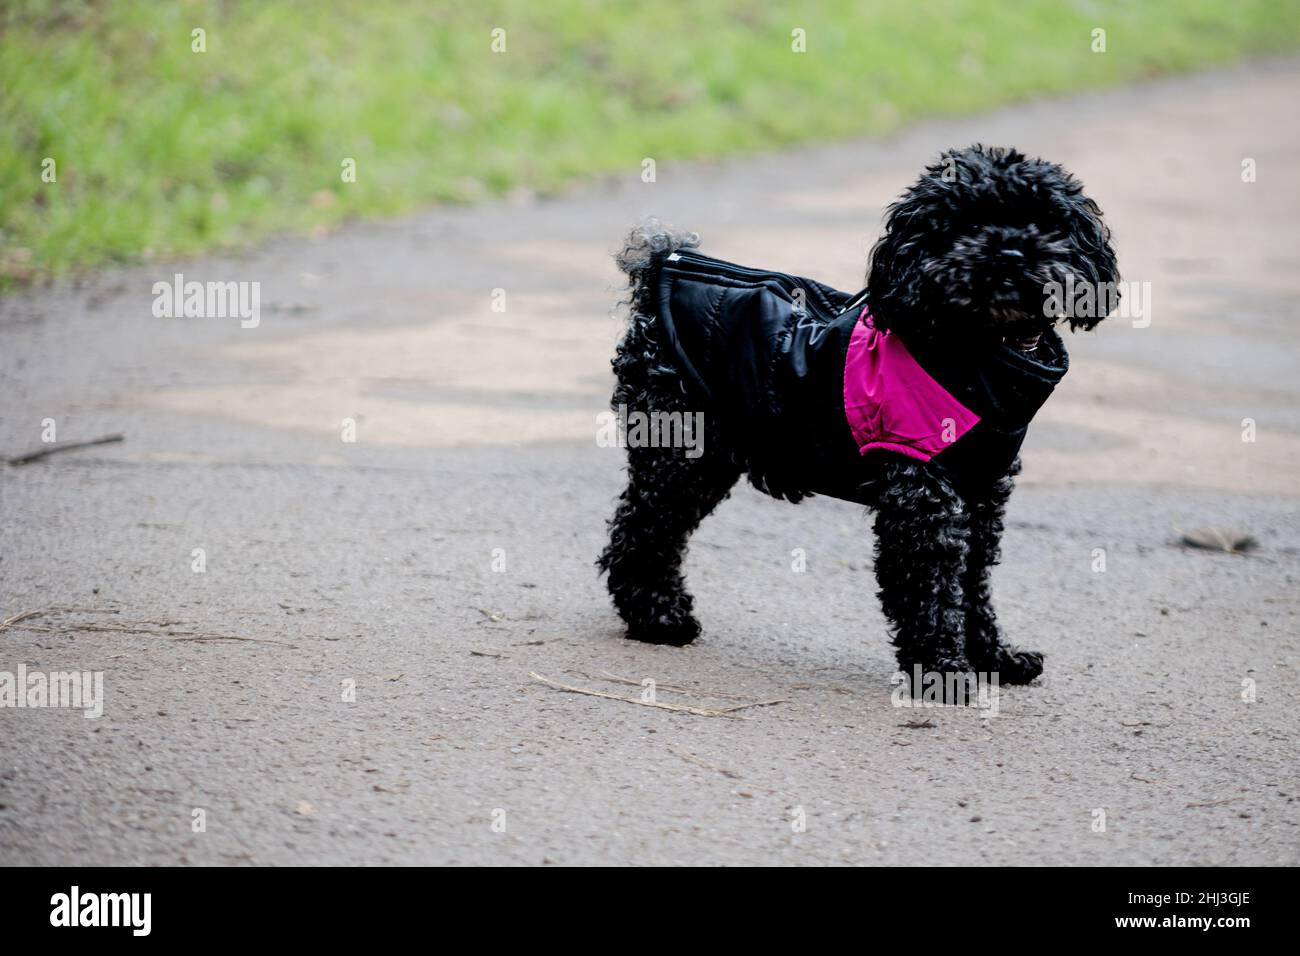 A Black Poodle like Dog. Wearing a pink and black coat whilst standing in the cold at snuff Mills, Bristol England Stock Photo